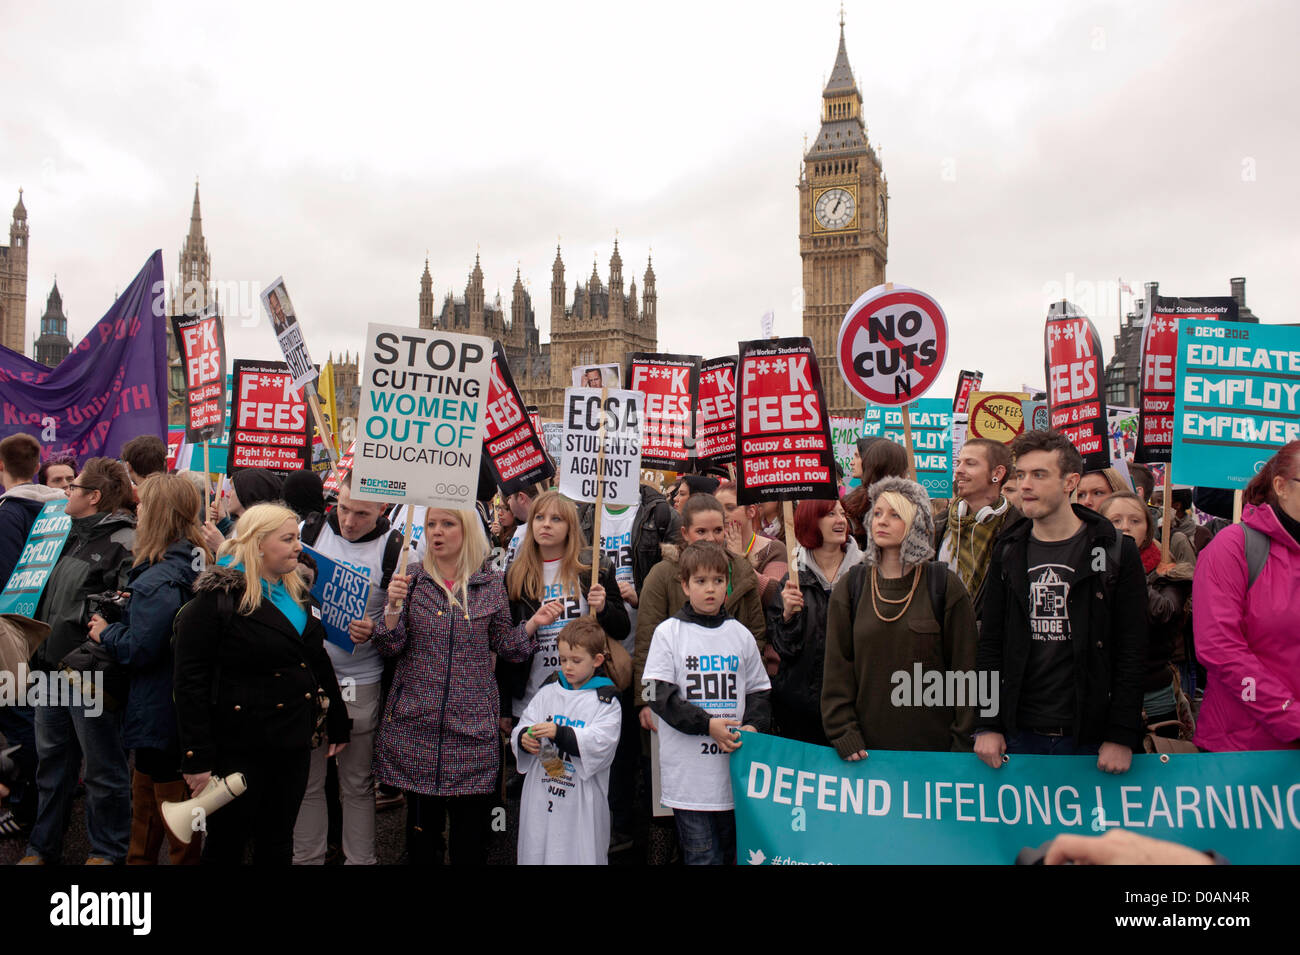 London, UK - 21 November 2012: thousand of students take part in a march organised by the National Union of Students from Temple Place to Kennington Park to protest against tuition fees and unemployment.  © pcruciatti / Alamy  Live News Stock Photo